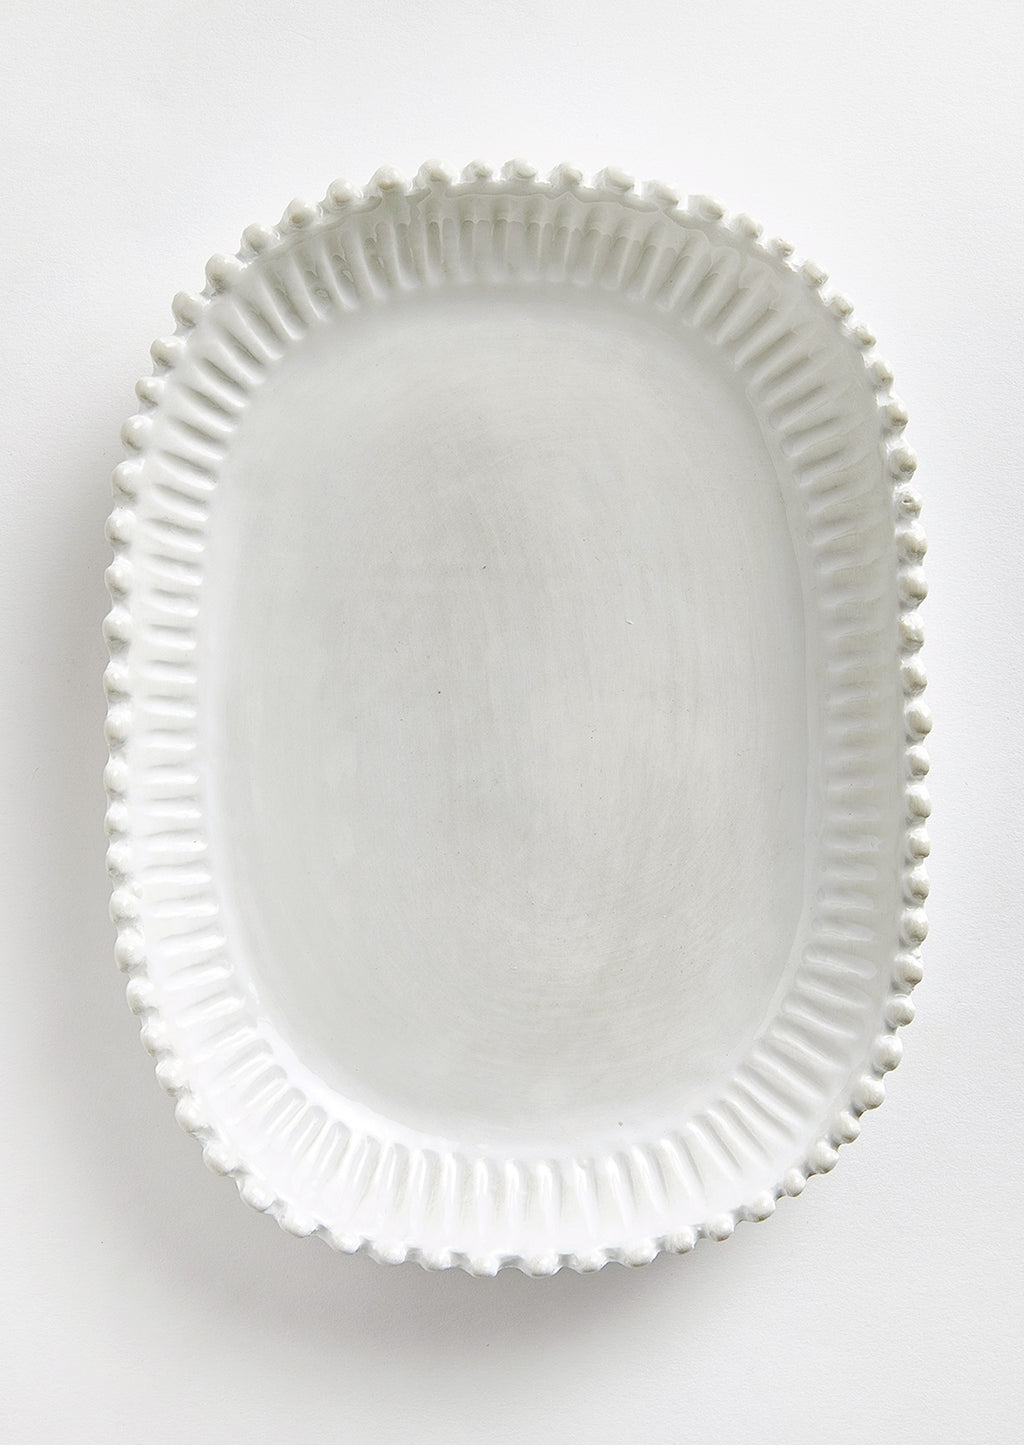 1: A rectangular ceramic platter in white with rounded edges and hobnail pleated border.